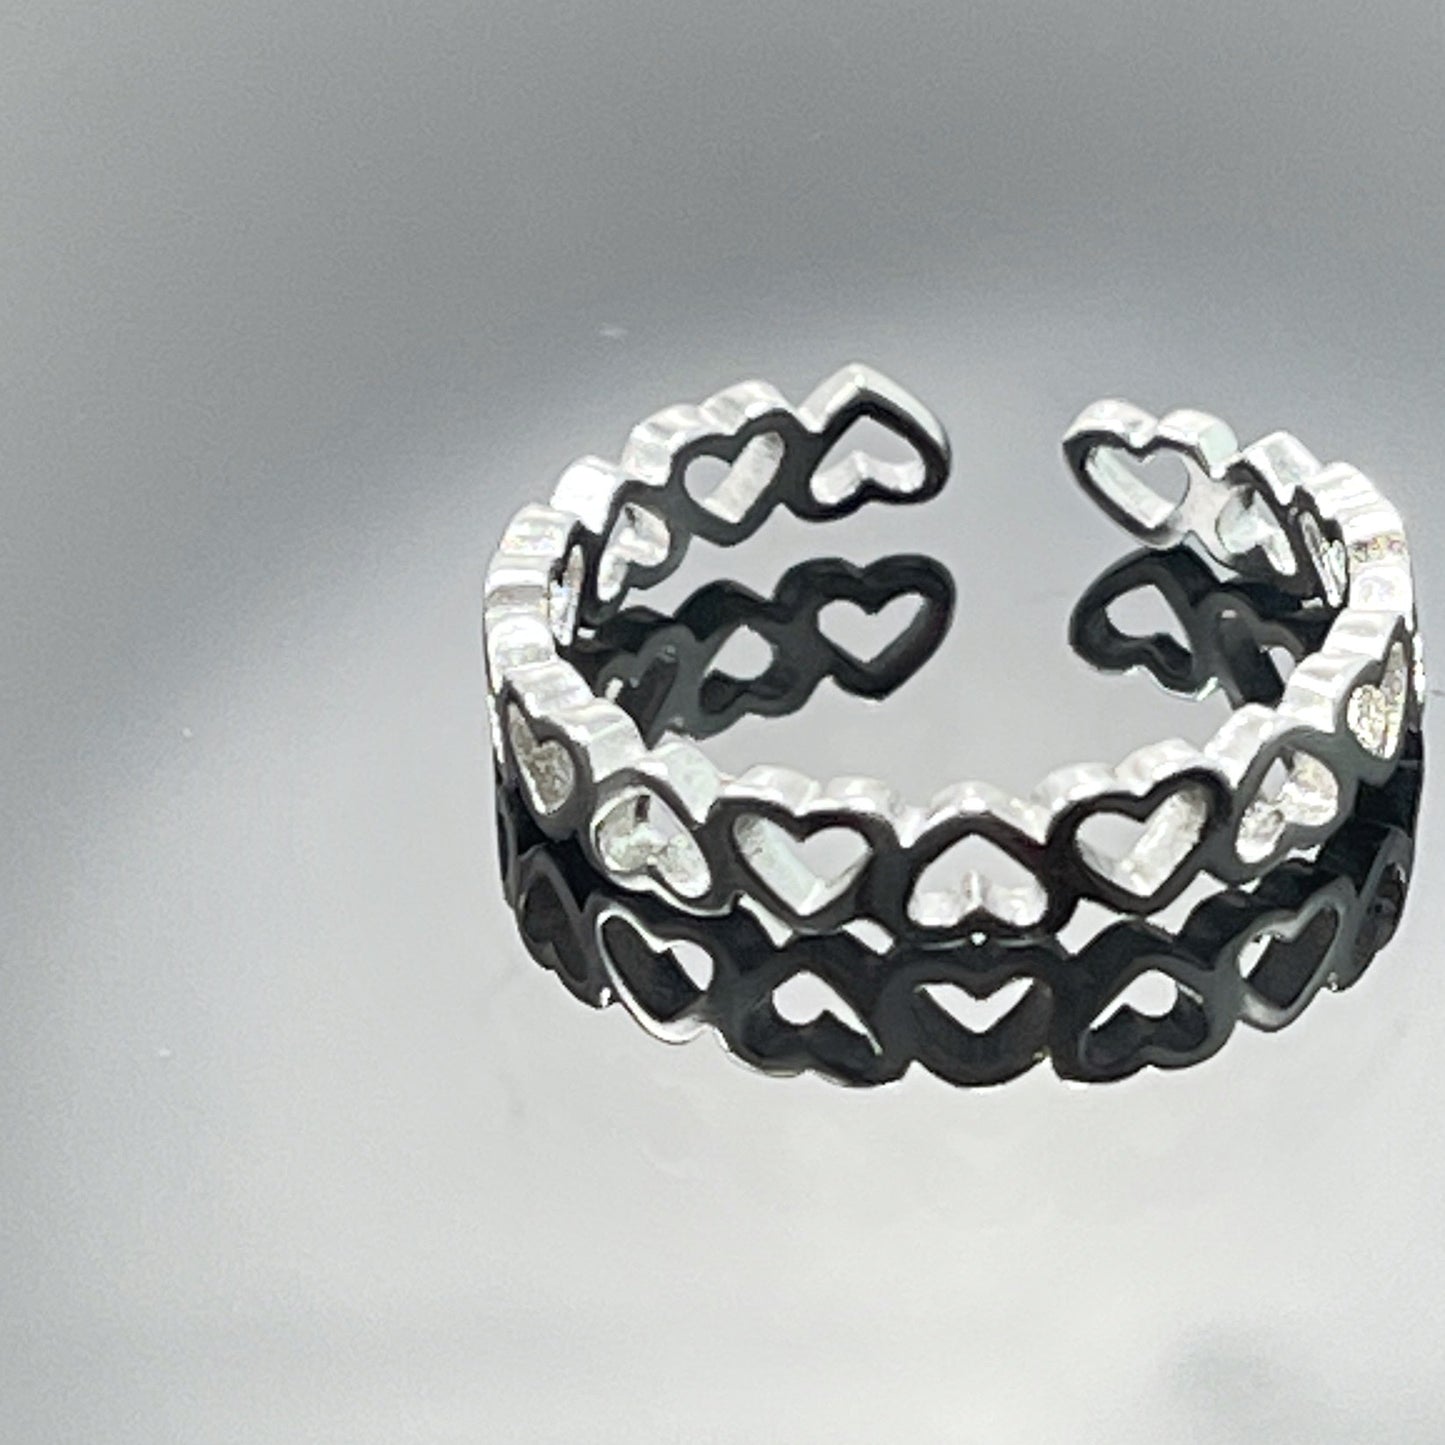 Heart sterling silver band ring